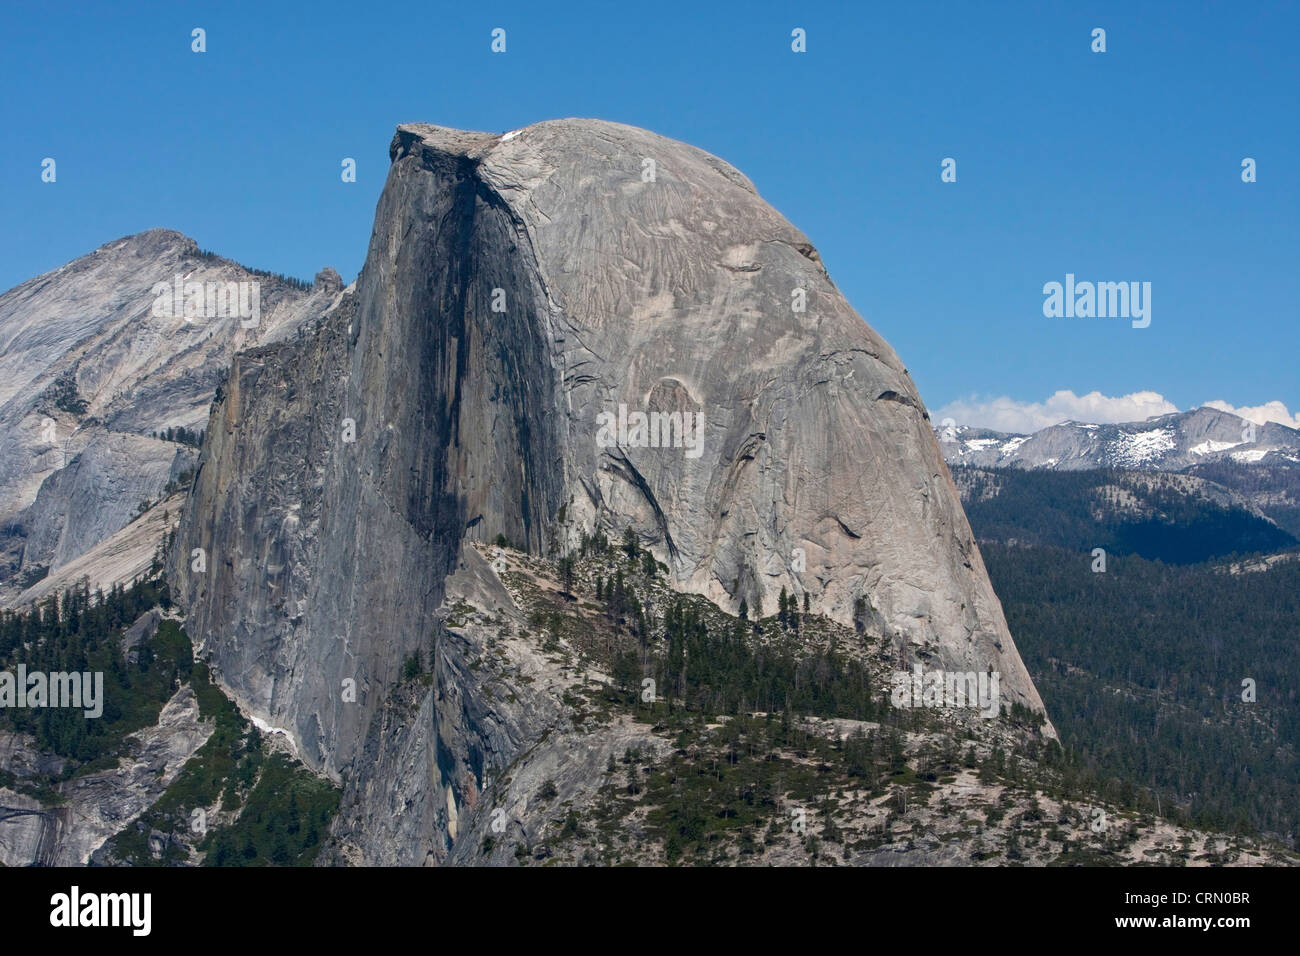 A scenic view of Half Dome from Glacier Point, Yosemite National Park, California, USA in June Stock Photo